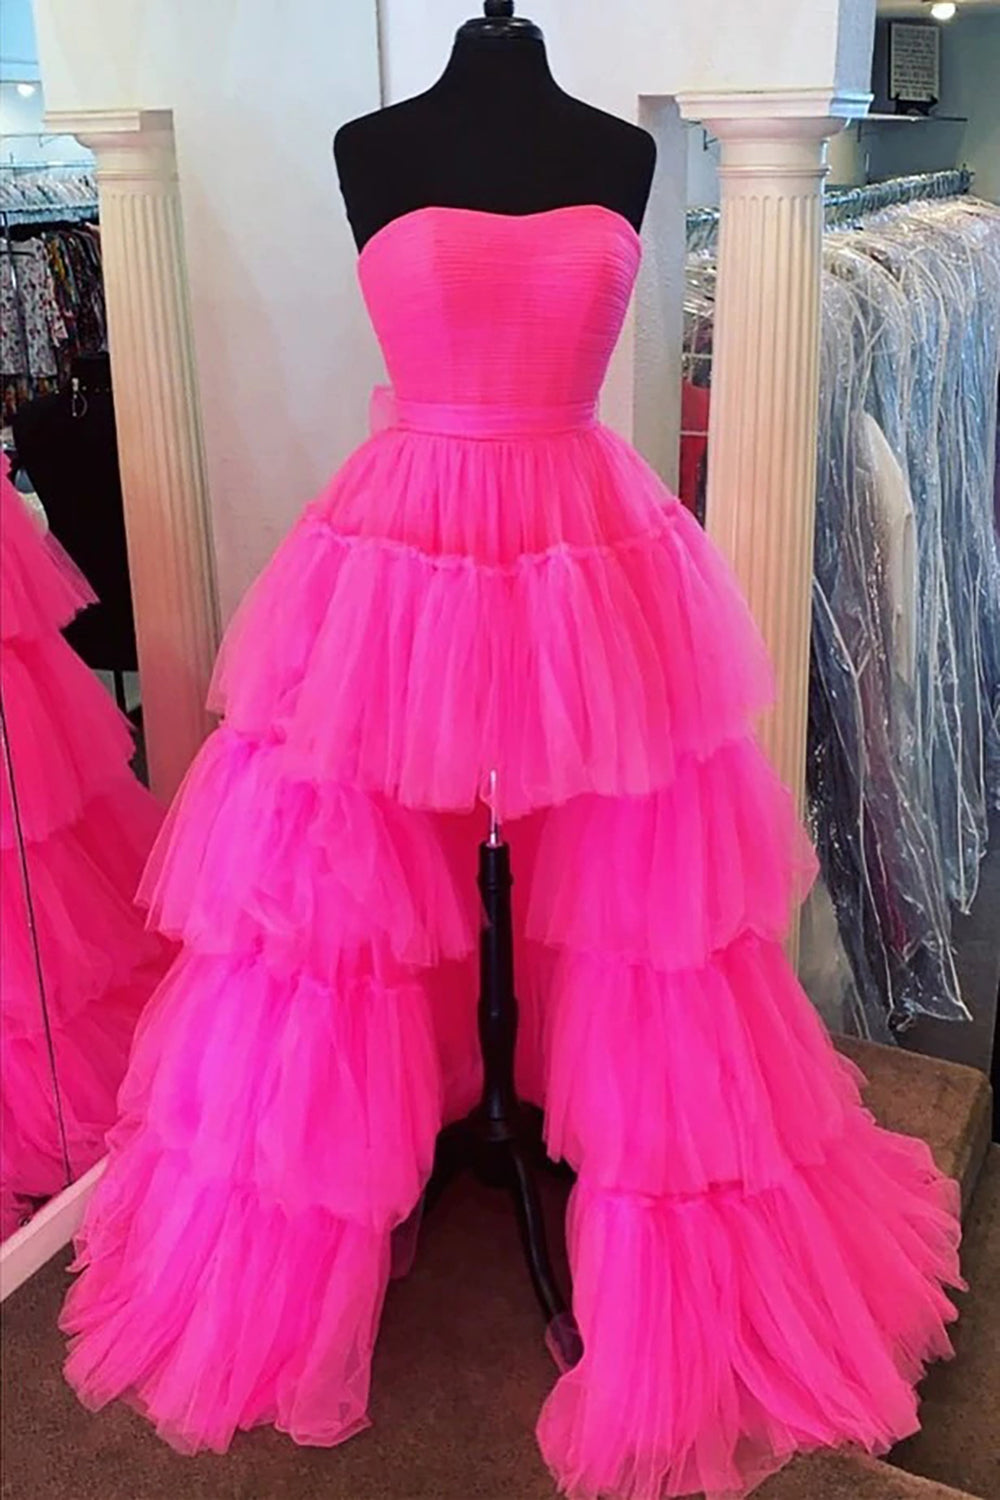 June |A-line High Low Strapless Tulle Prom Dress with Ruffles